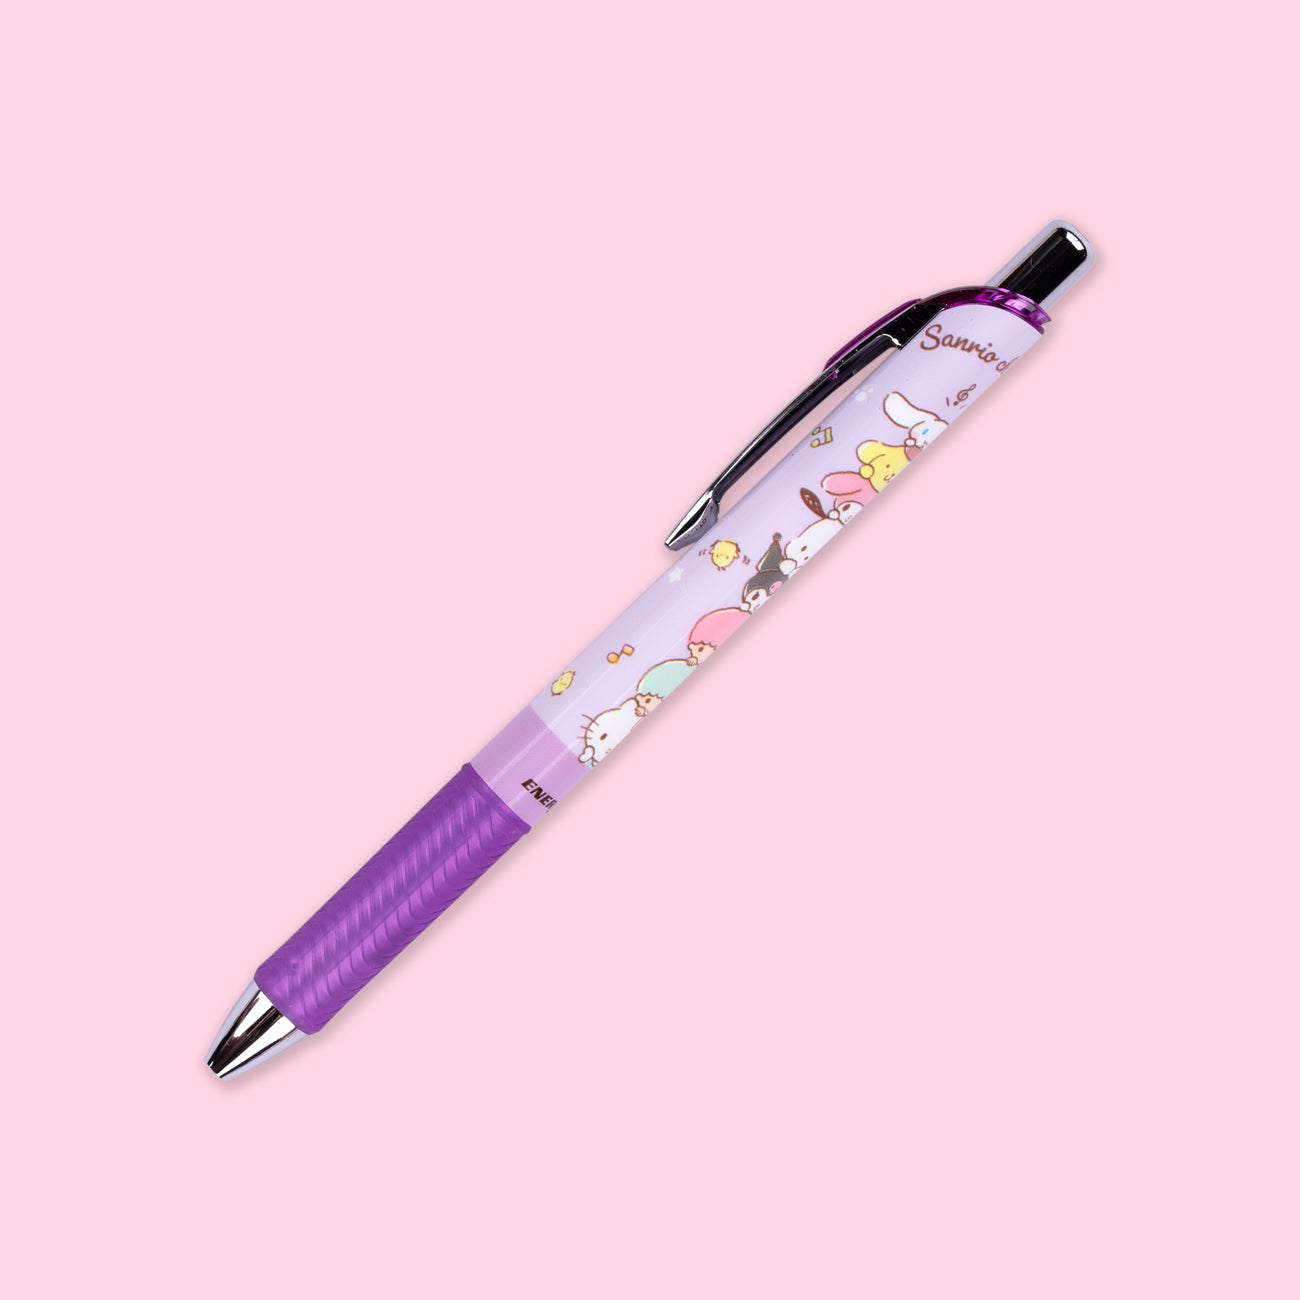 Sanrio Characters Ballpoint Pen Illustration Book – Easy and Cute